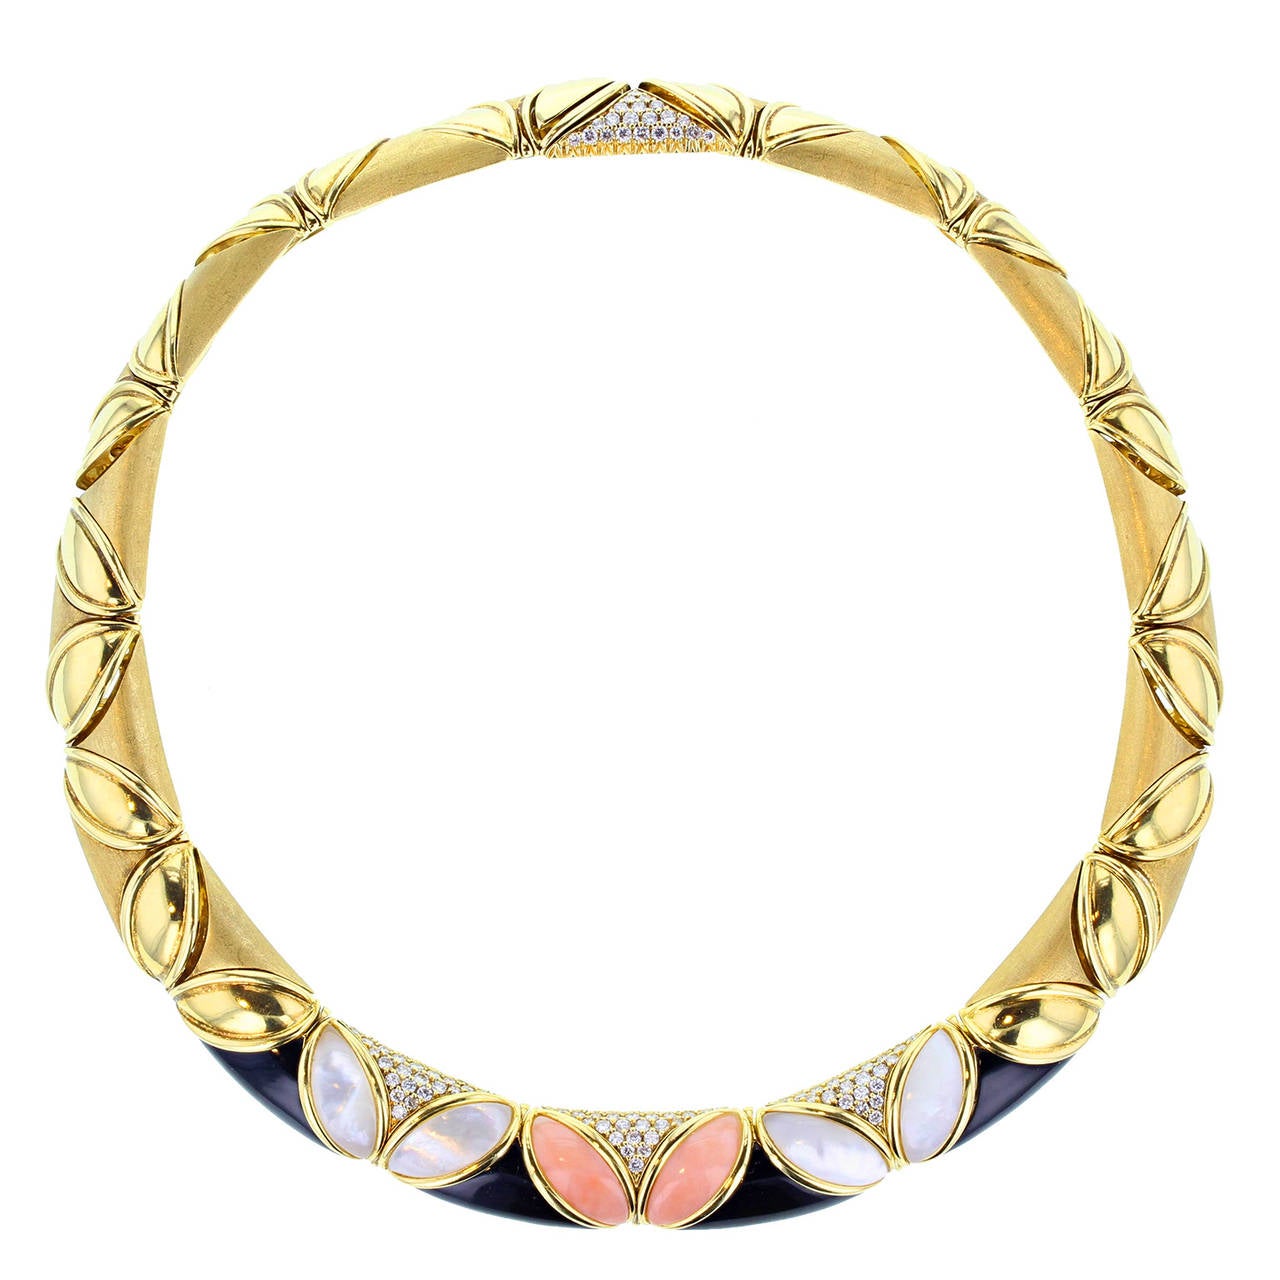 The exceptional retro parure by Piaget is in fantastic condition. Comprising a collar, rigid bracelet and pair of earrings and formed with leaf-shaped/marquise-shaped motifs of gold, pink coral, white mother-of-pearl and accented with black onyx and